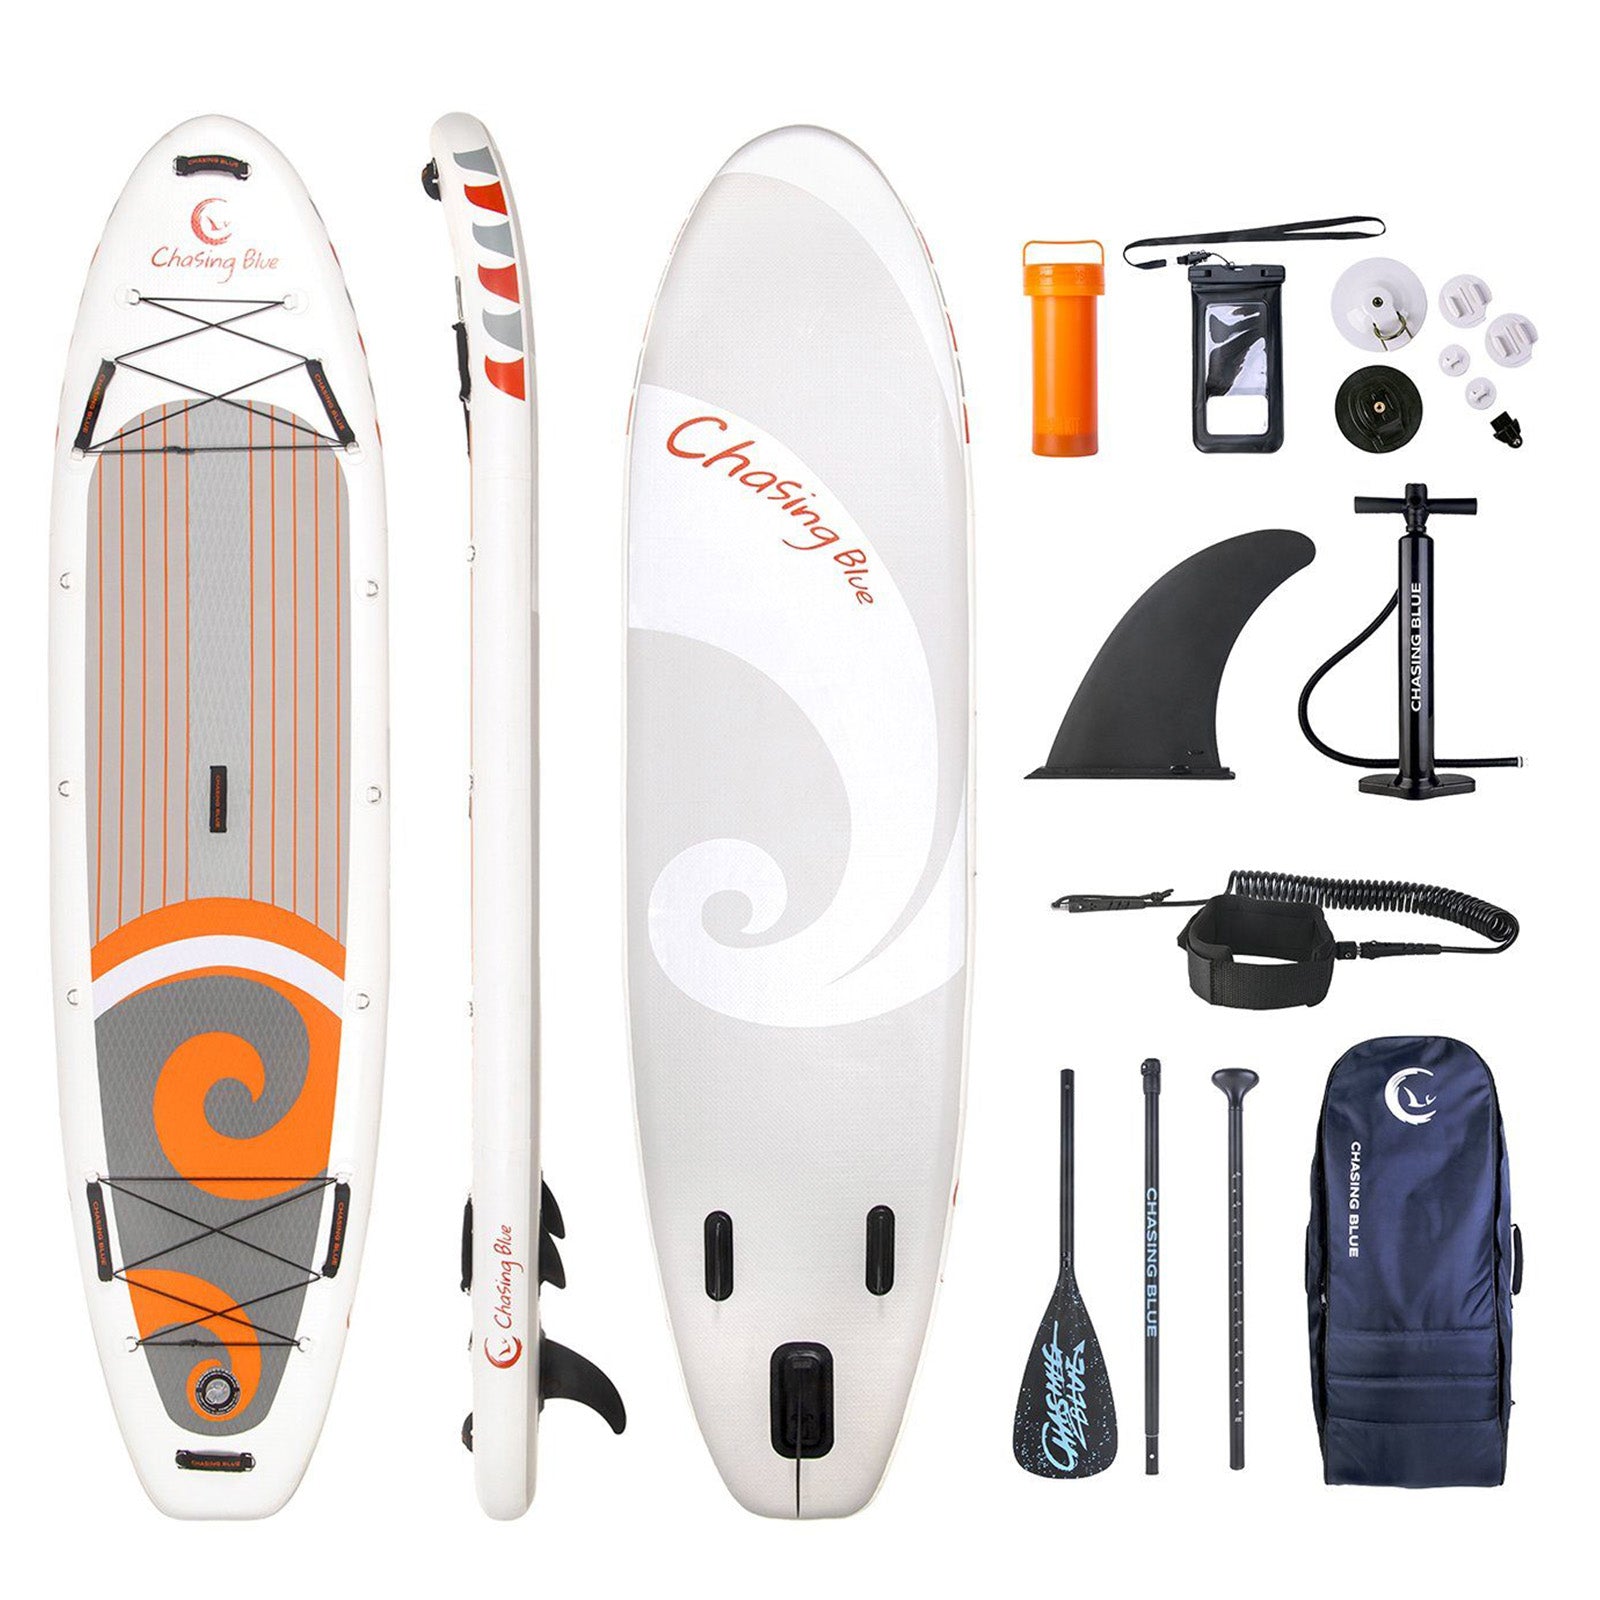 SOLAR SPIRIT - ALL ROUND iSUP BOARD 11'6" FOR ALL-LEVEL